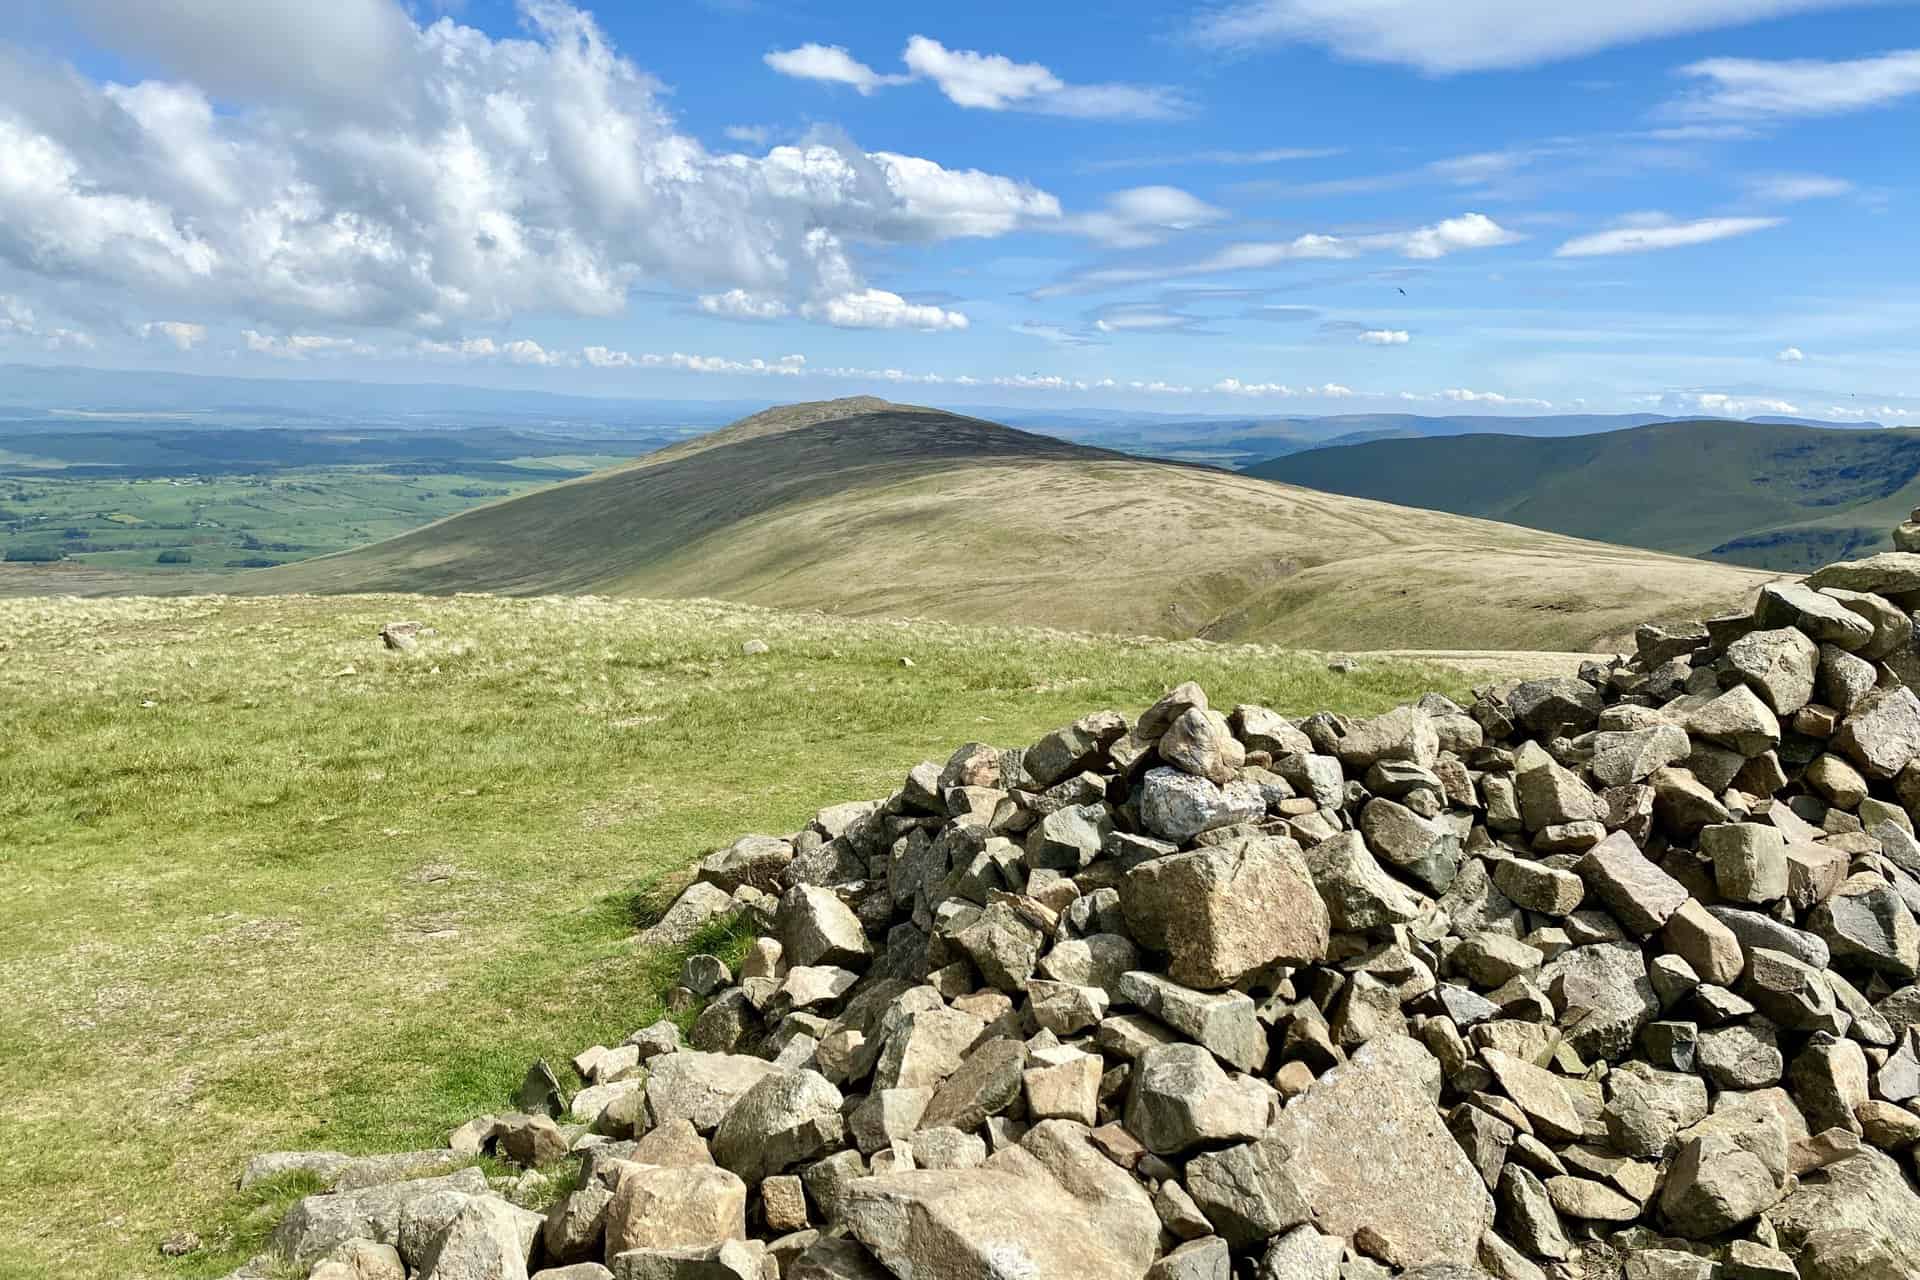 Carrock Fell as seen from the summit of High Pike, height 658 metres (2159 feet).